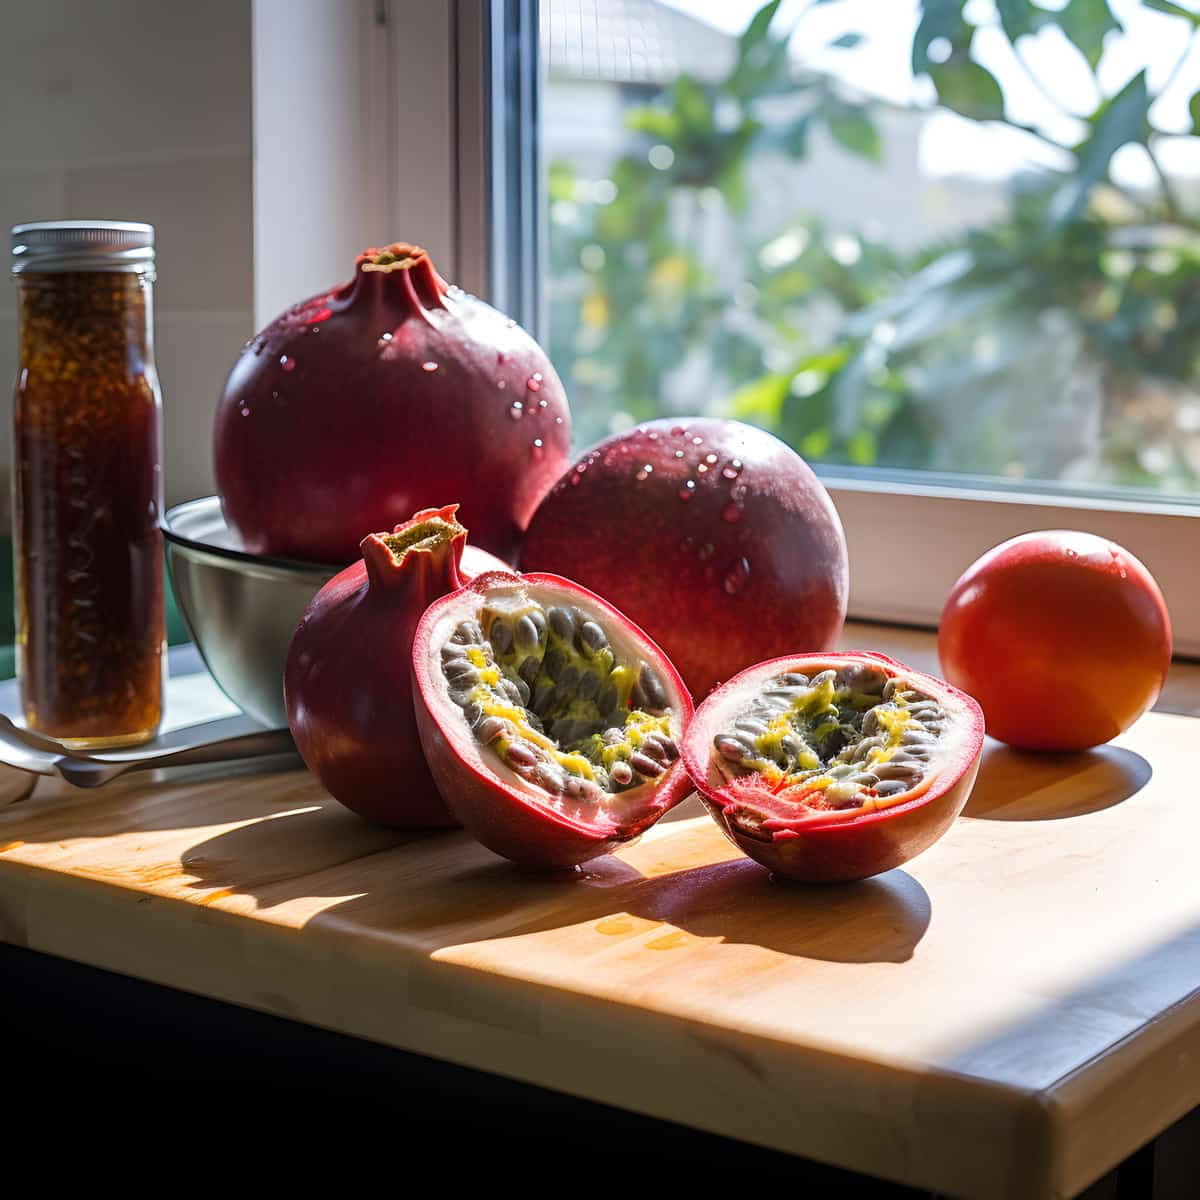 Scarlet Passionfruit on a kitchen counter